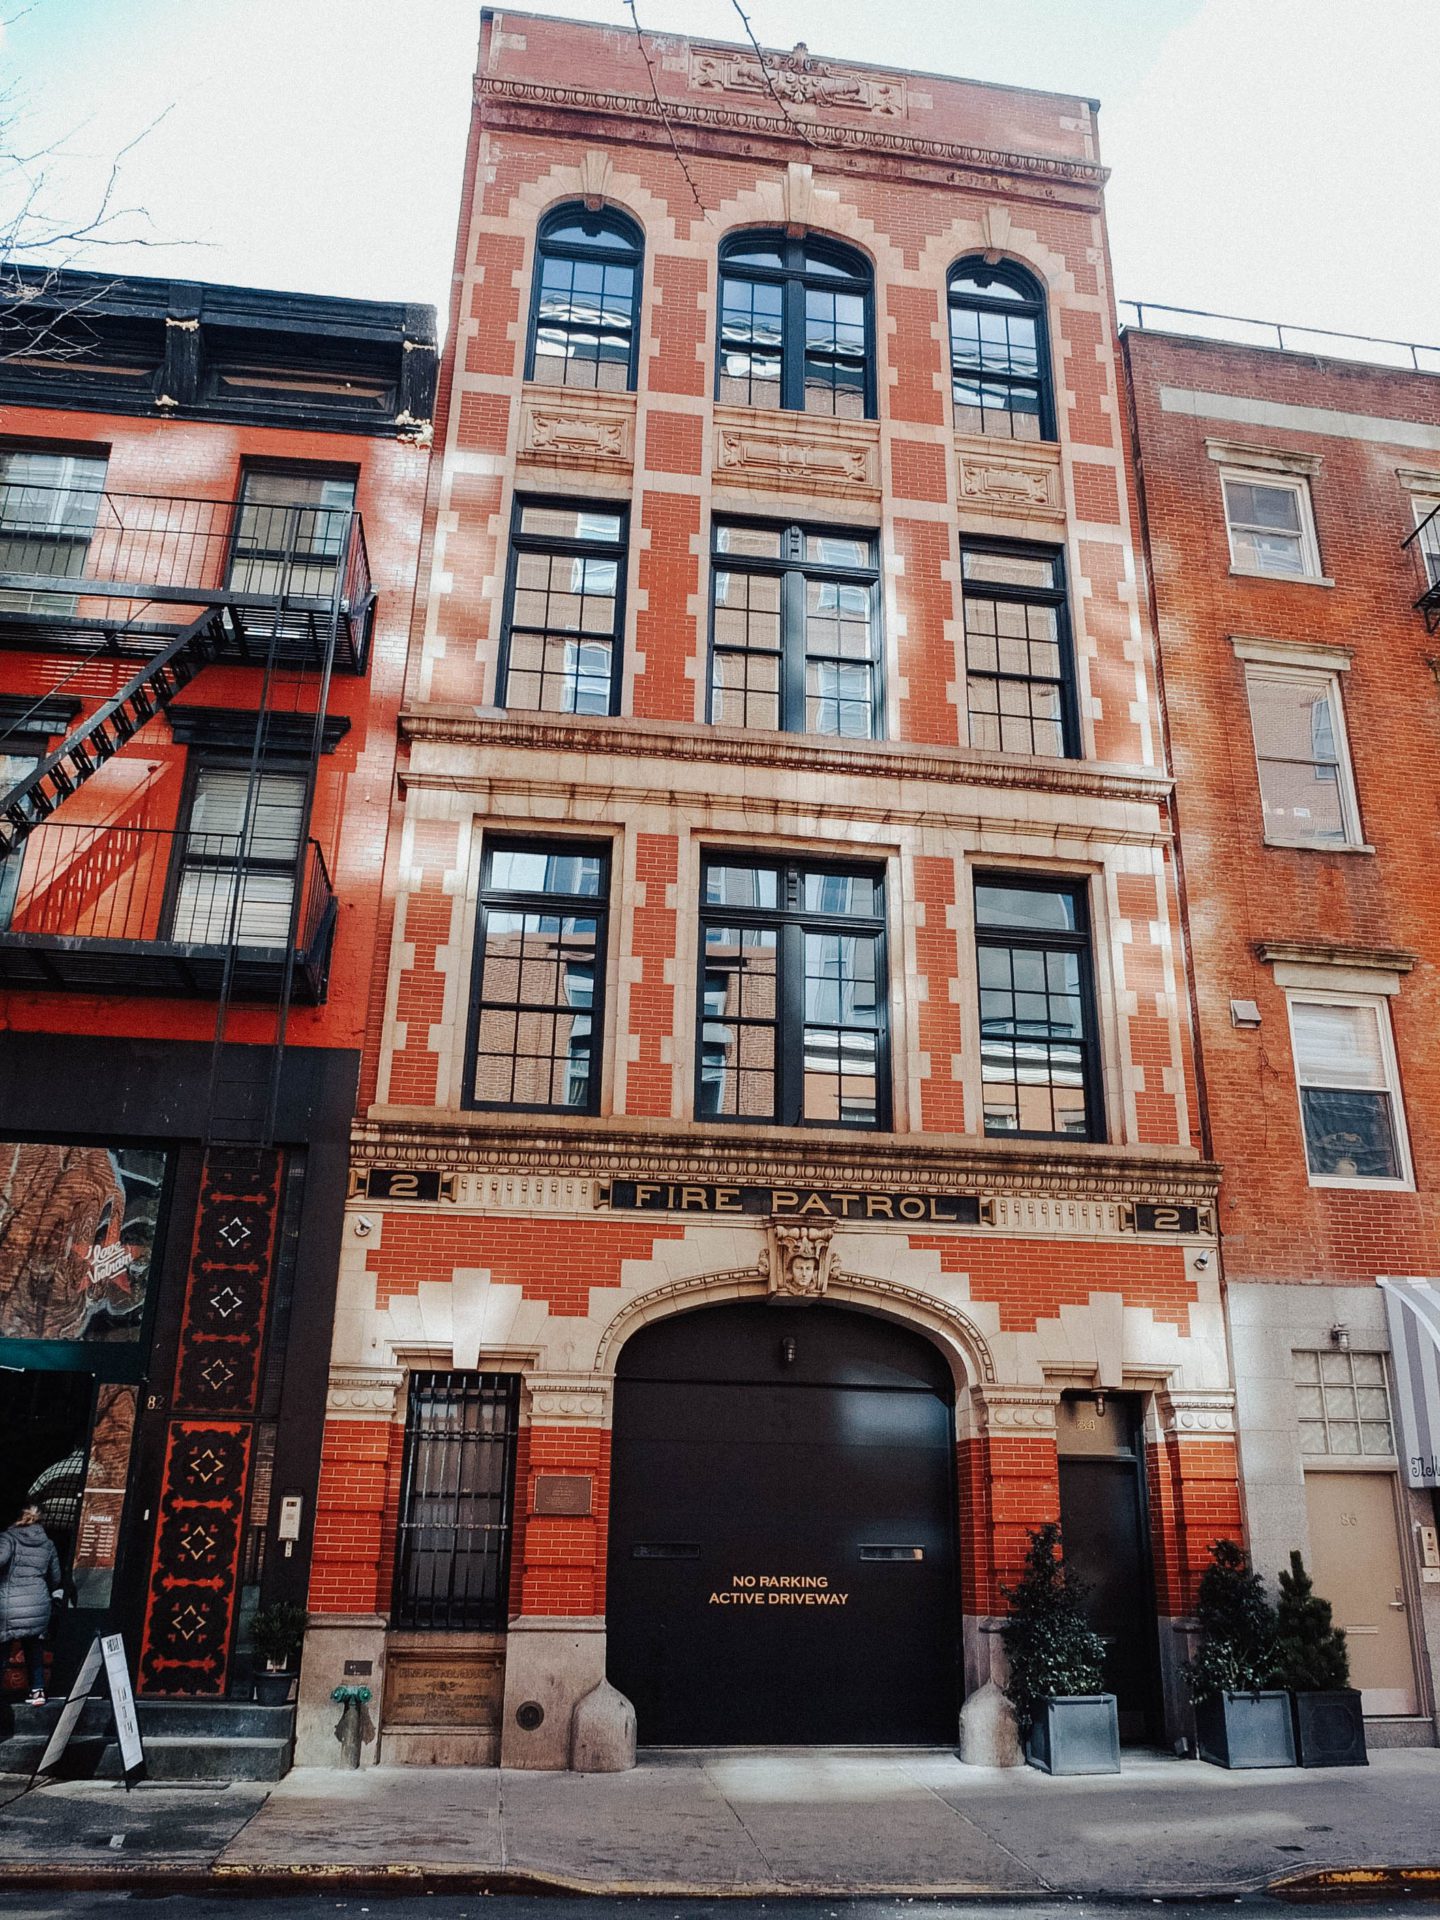 Old fire station building - New York City Food Tour